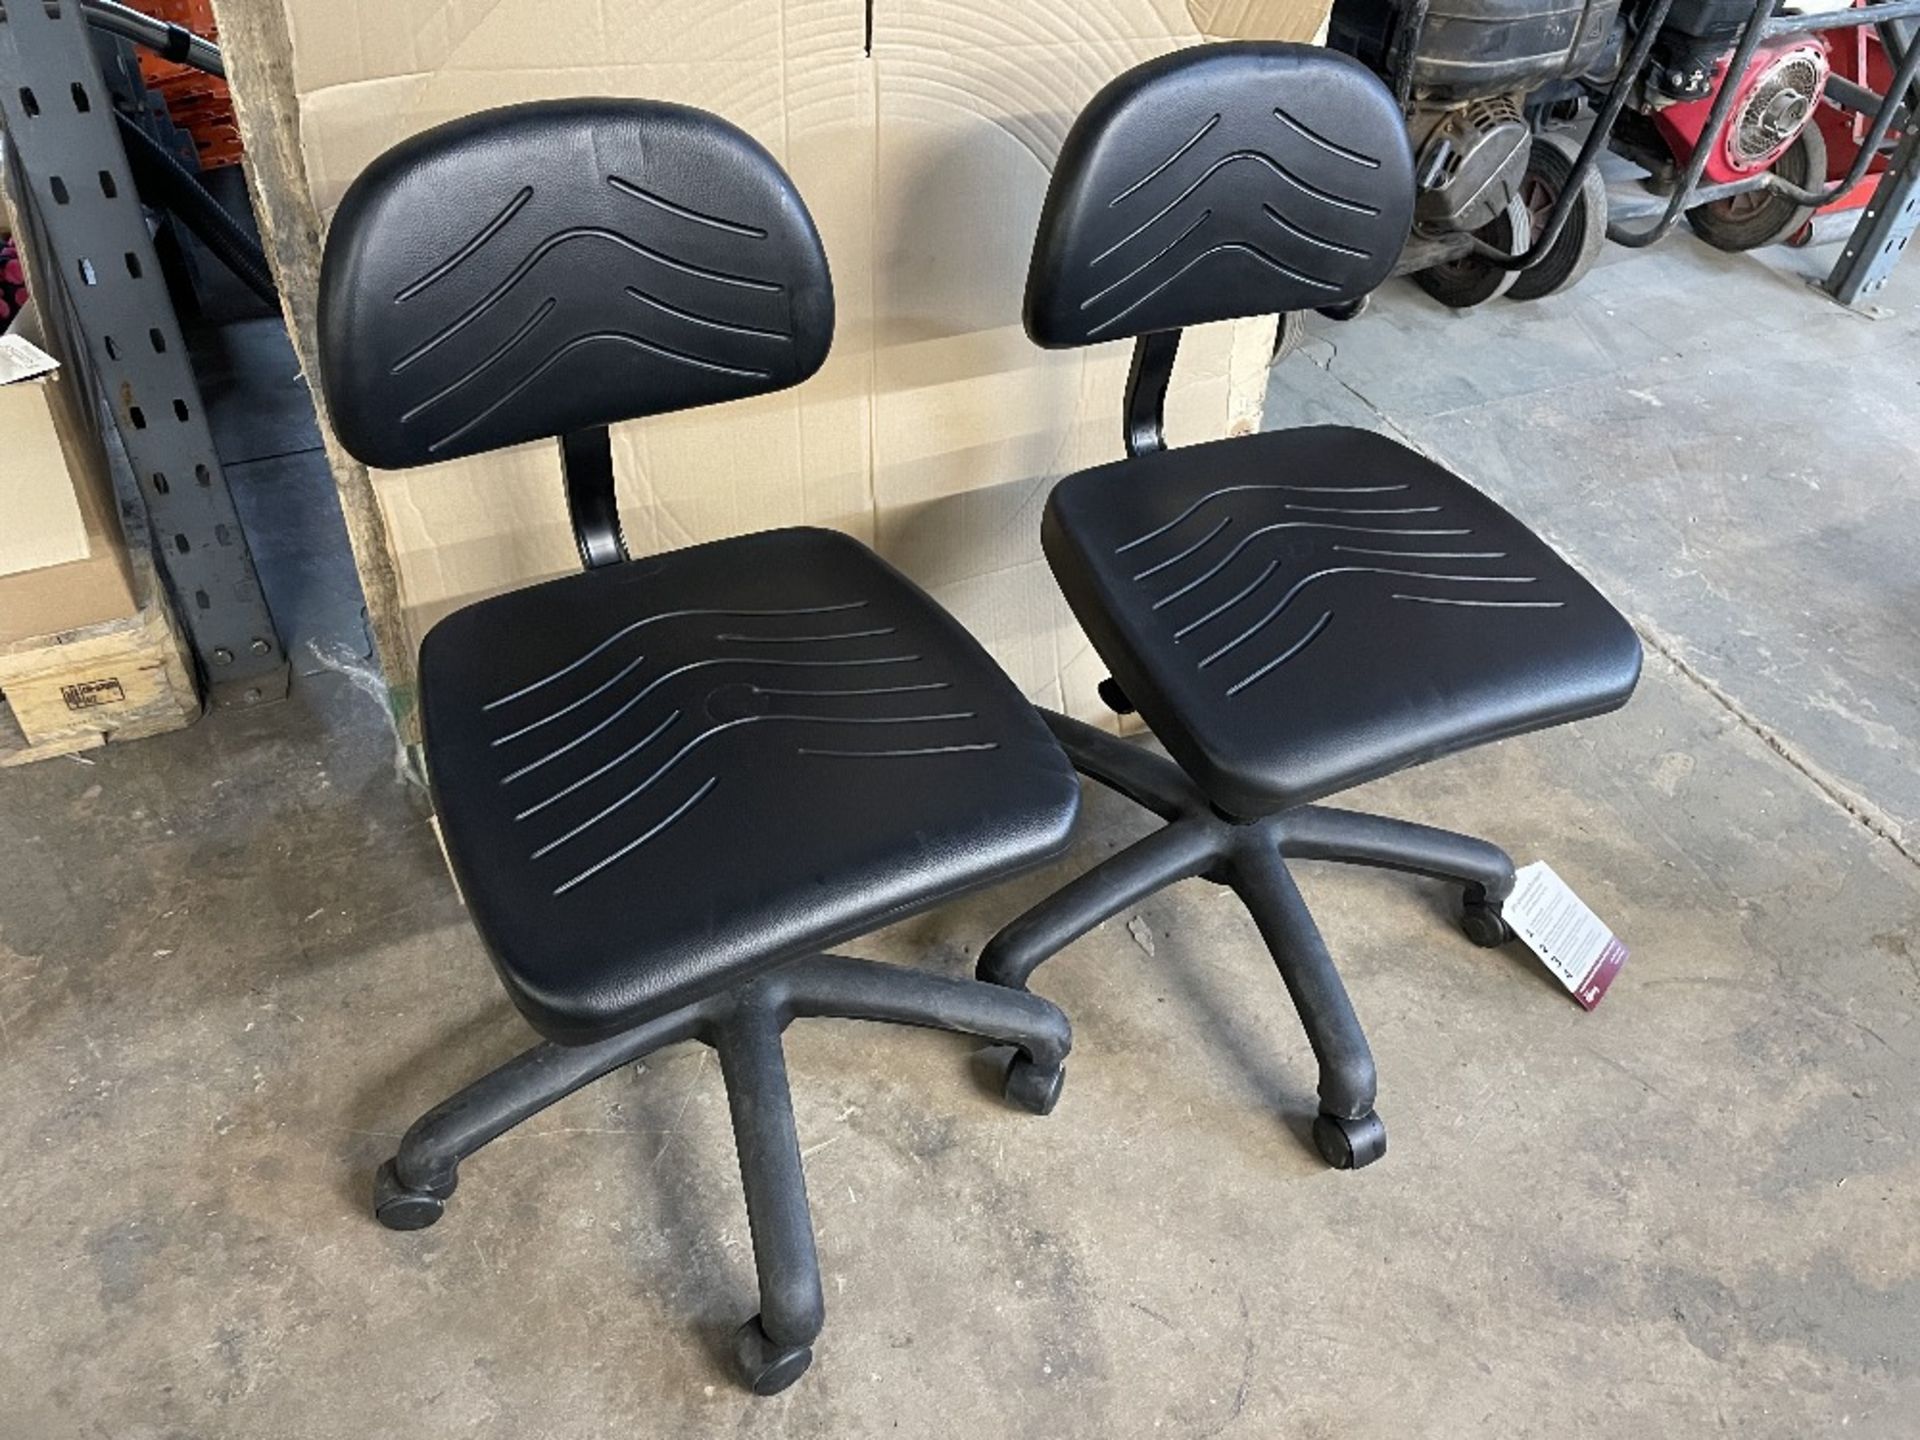 2 x Faux Leather Mobile Adjustable Chairs in Black - Image 3 of 4